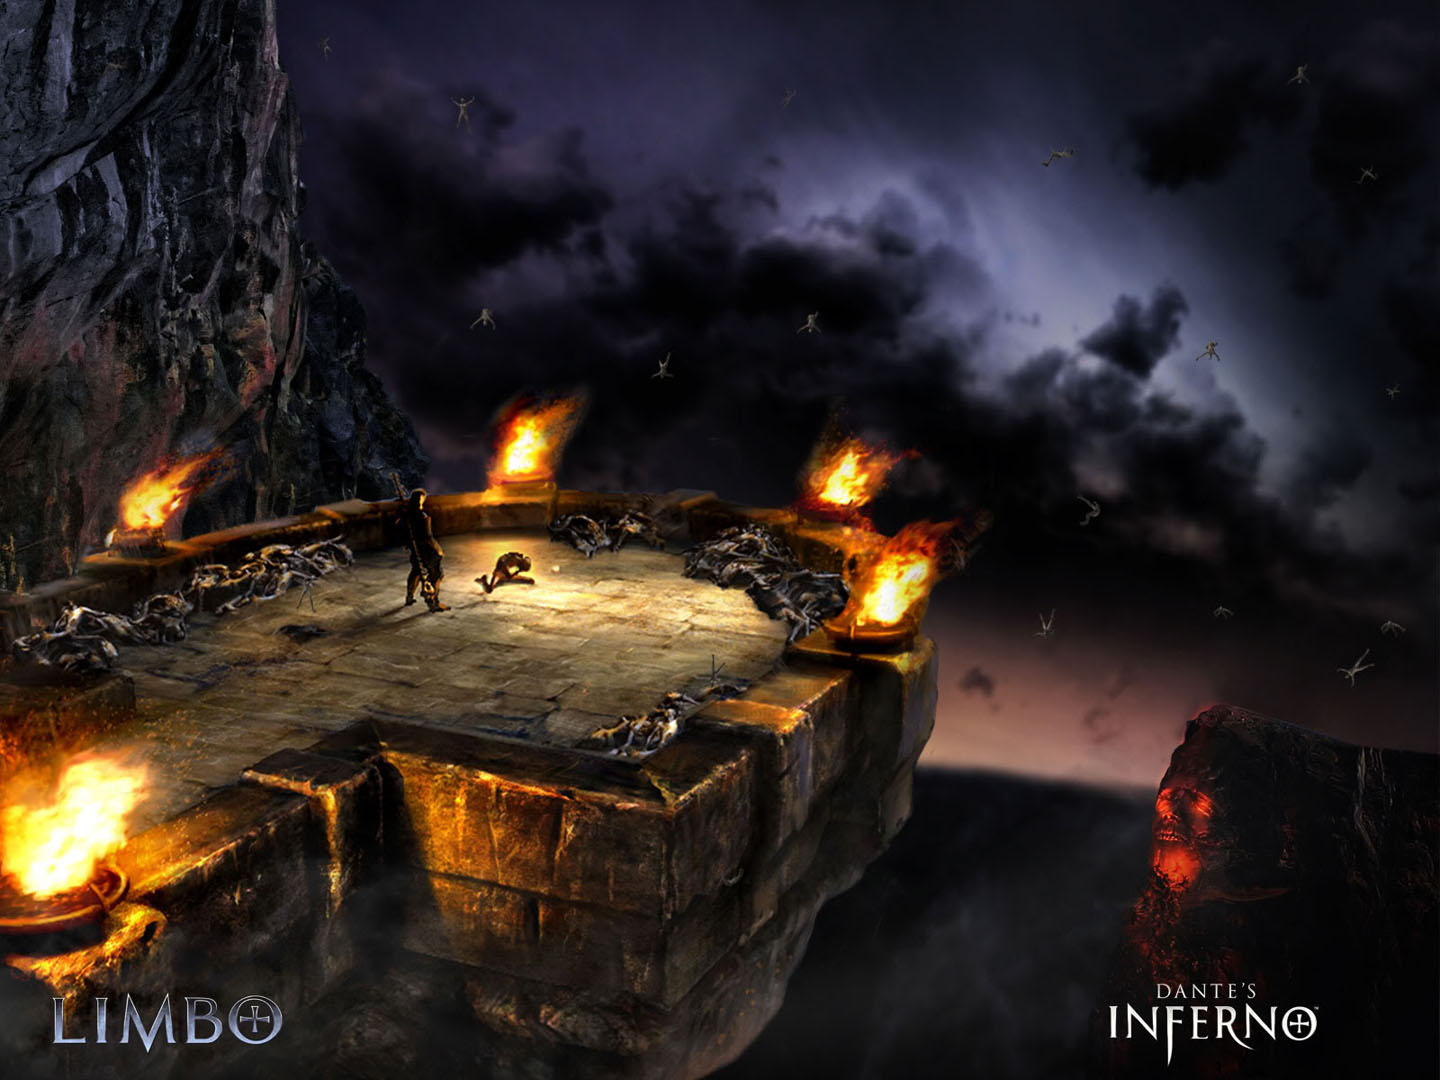 Dantes Inferno Action Games Picture Entitled Limbo